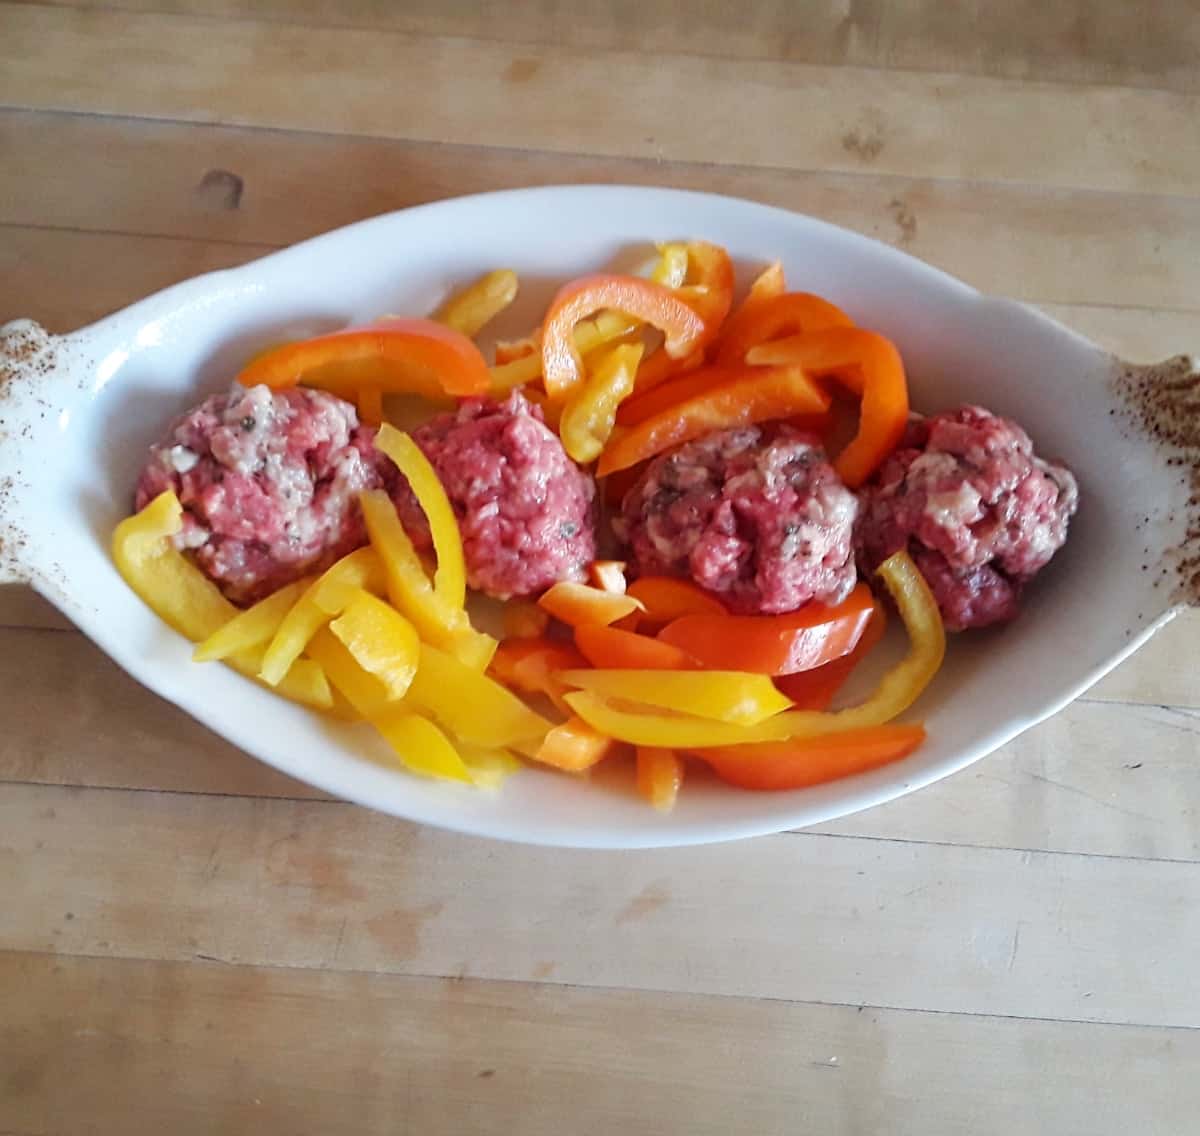 Uncooked meatballs with sliced peppers in small white baking dish.